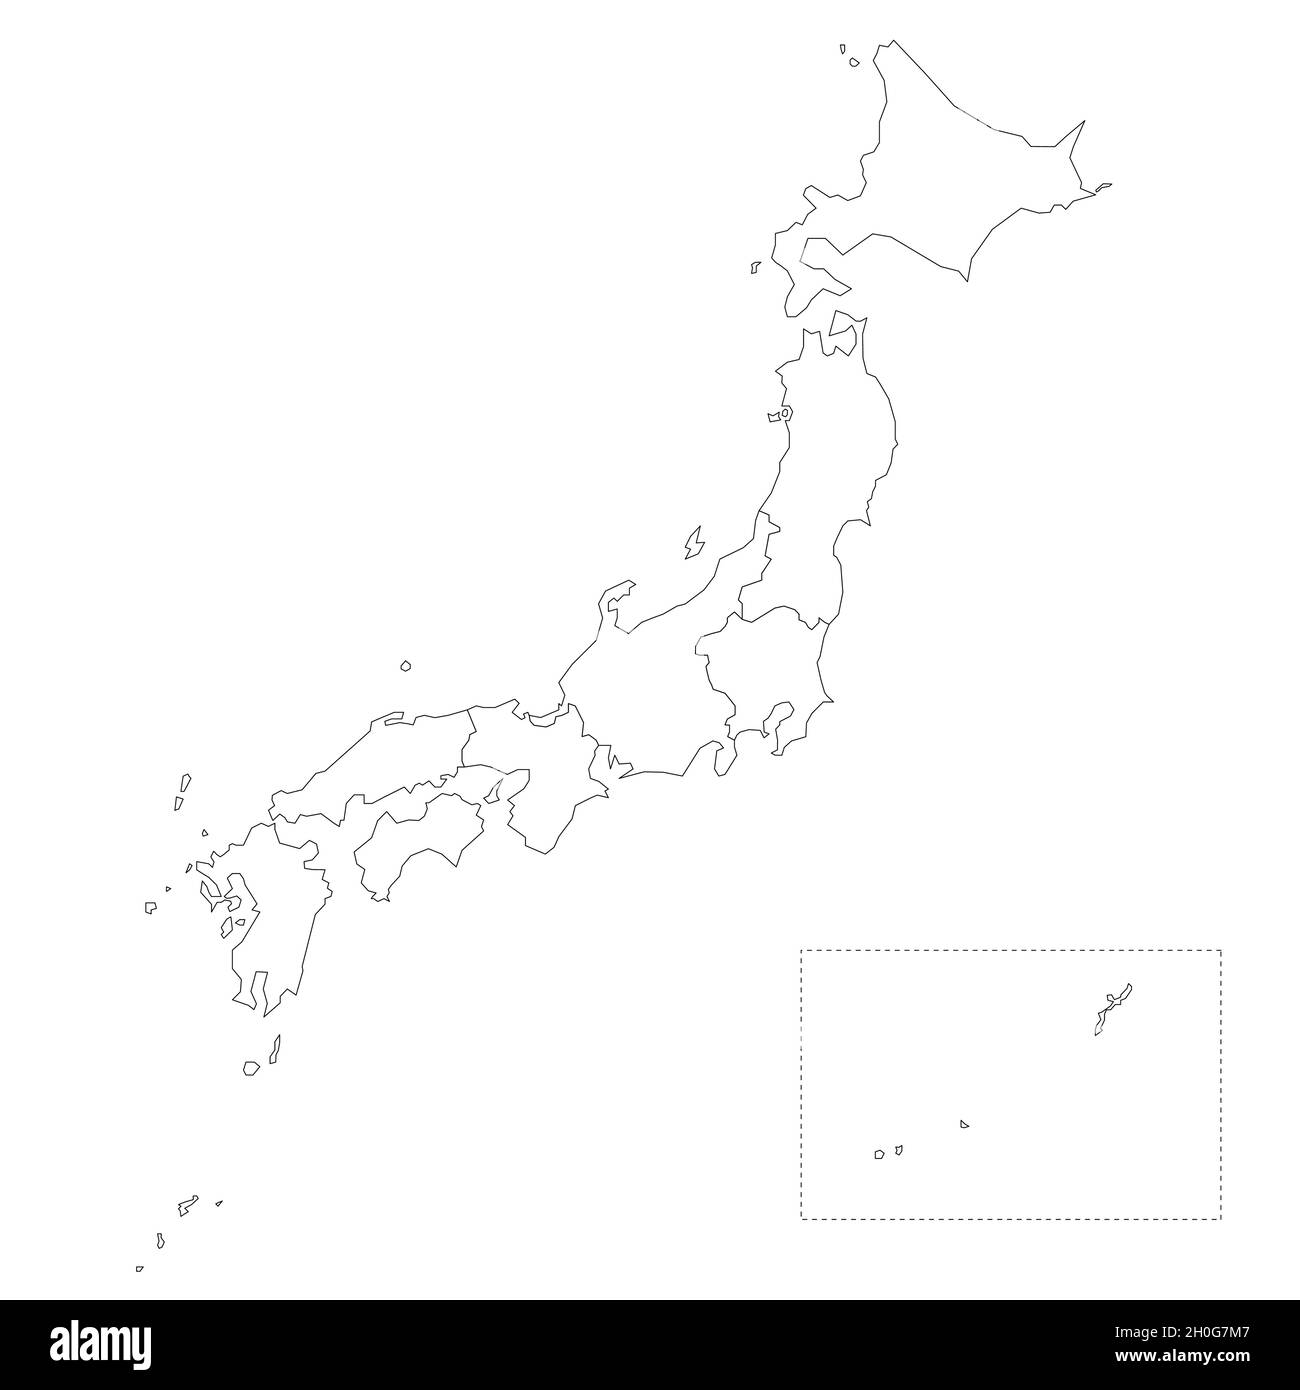 Political map of Japan. Administrative divisions - regions. Simple flat blank vector map Stock Vector